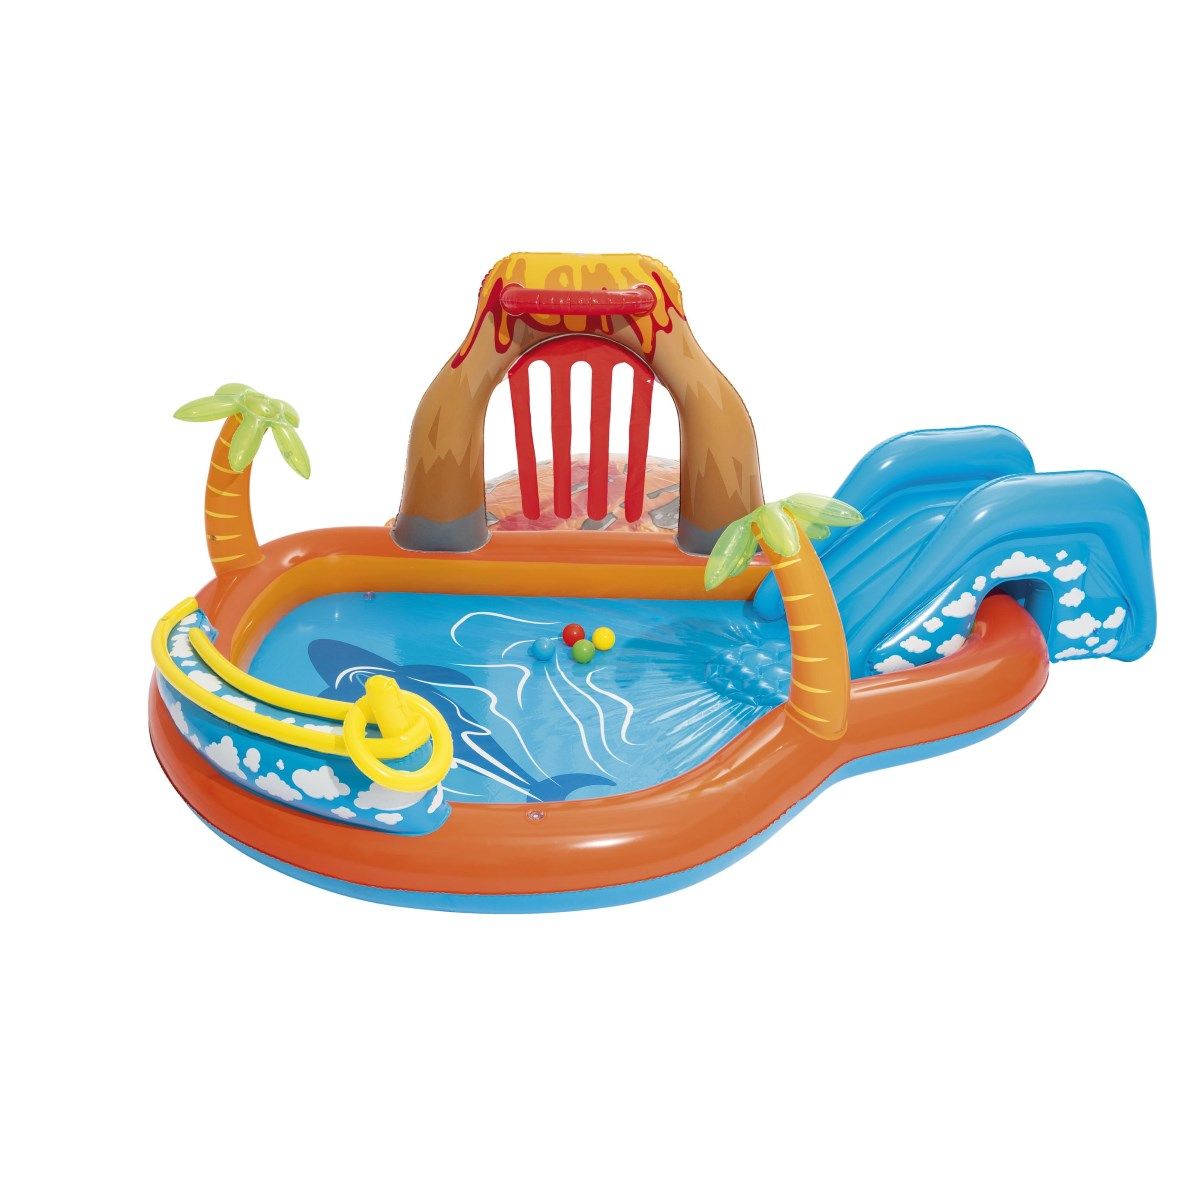 Bestway Water Play Centre Lava Lagoon Toy Brands A K Casey S Toys